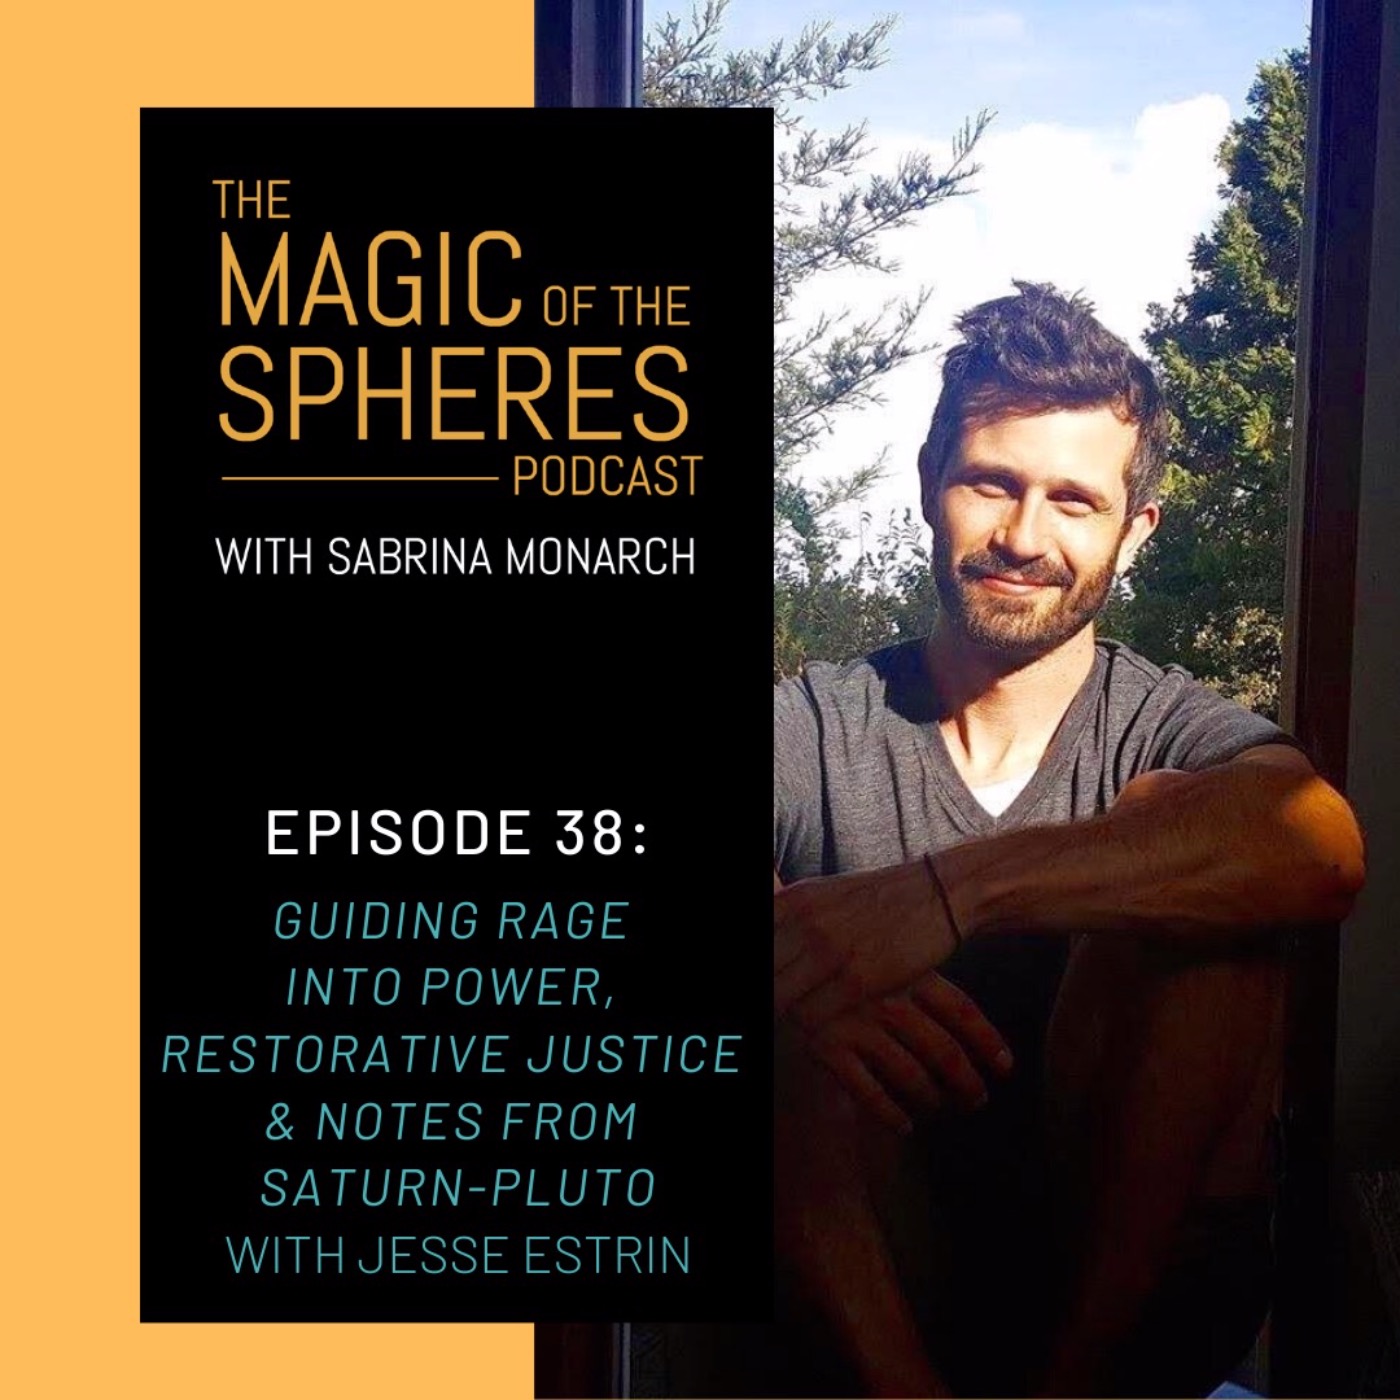 Guiding Rage Into Power, Restorative Justice & Notes from Saturn-Pluto with Jesse Estrin